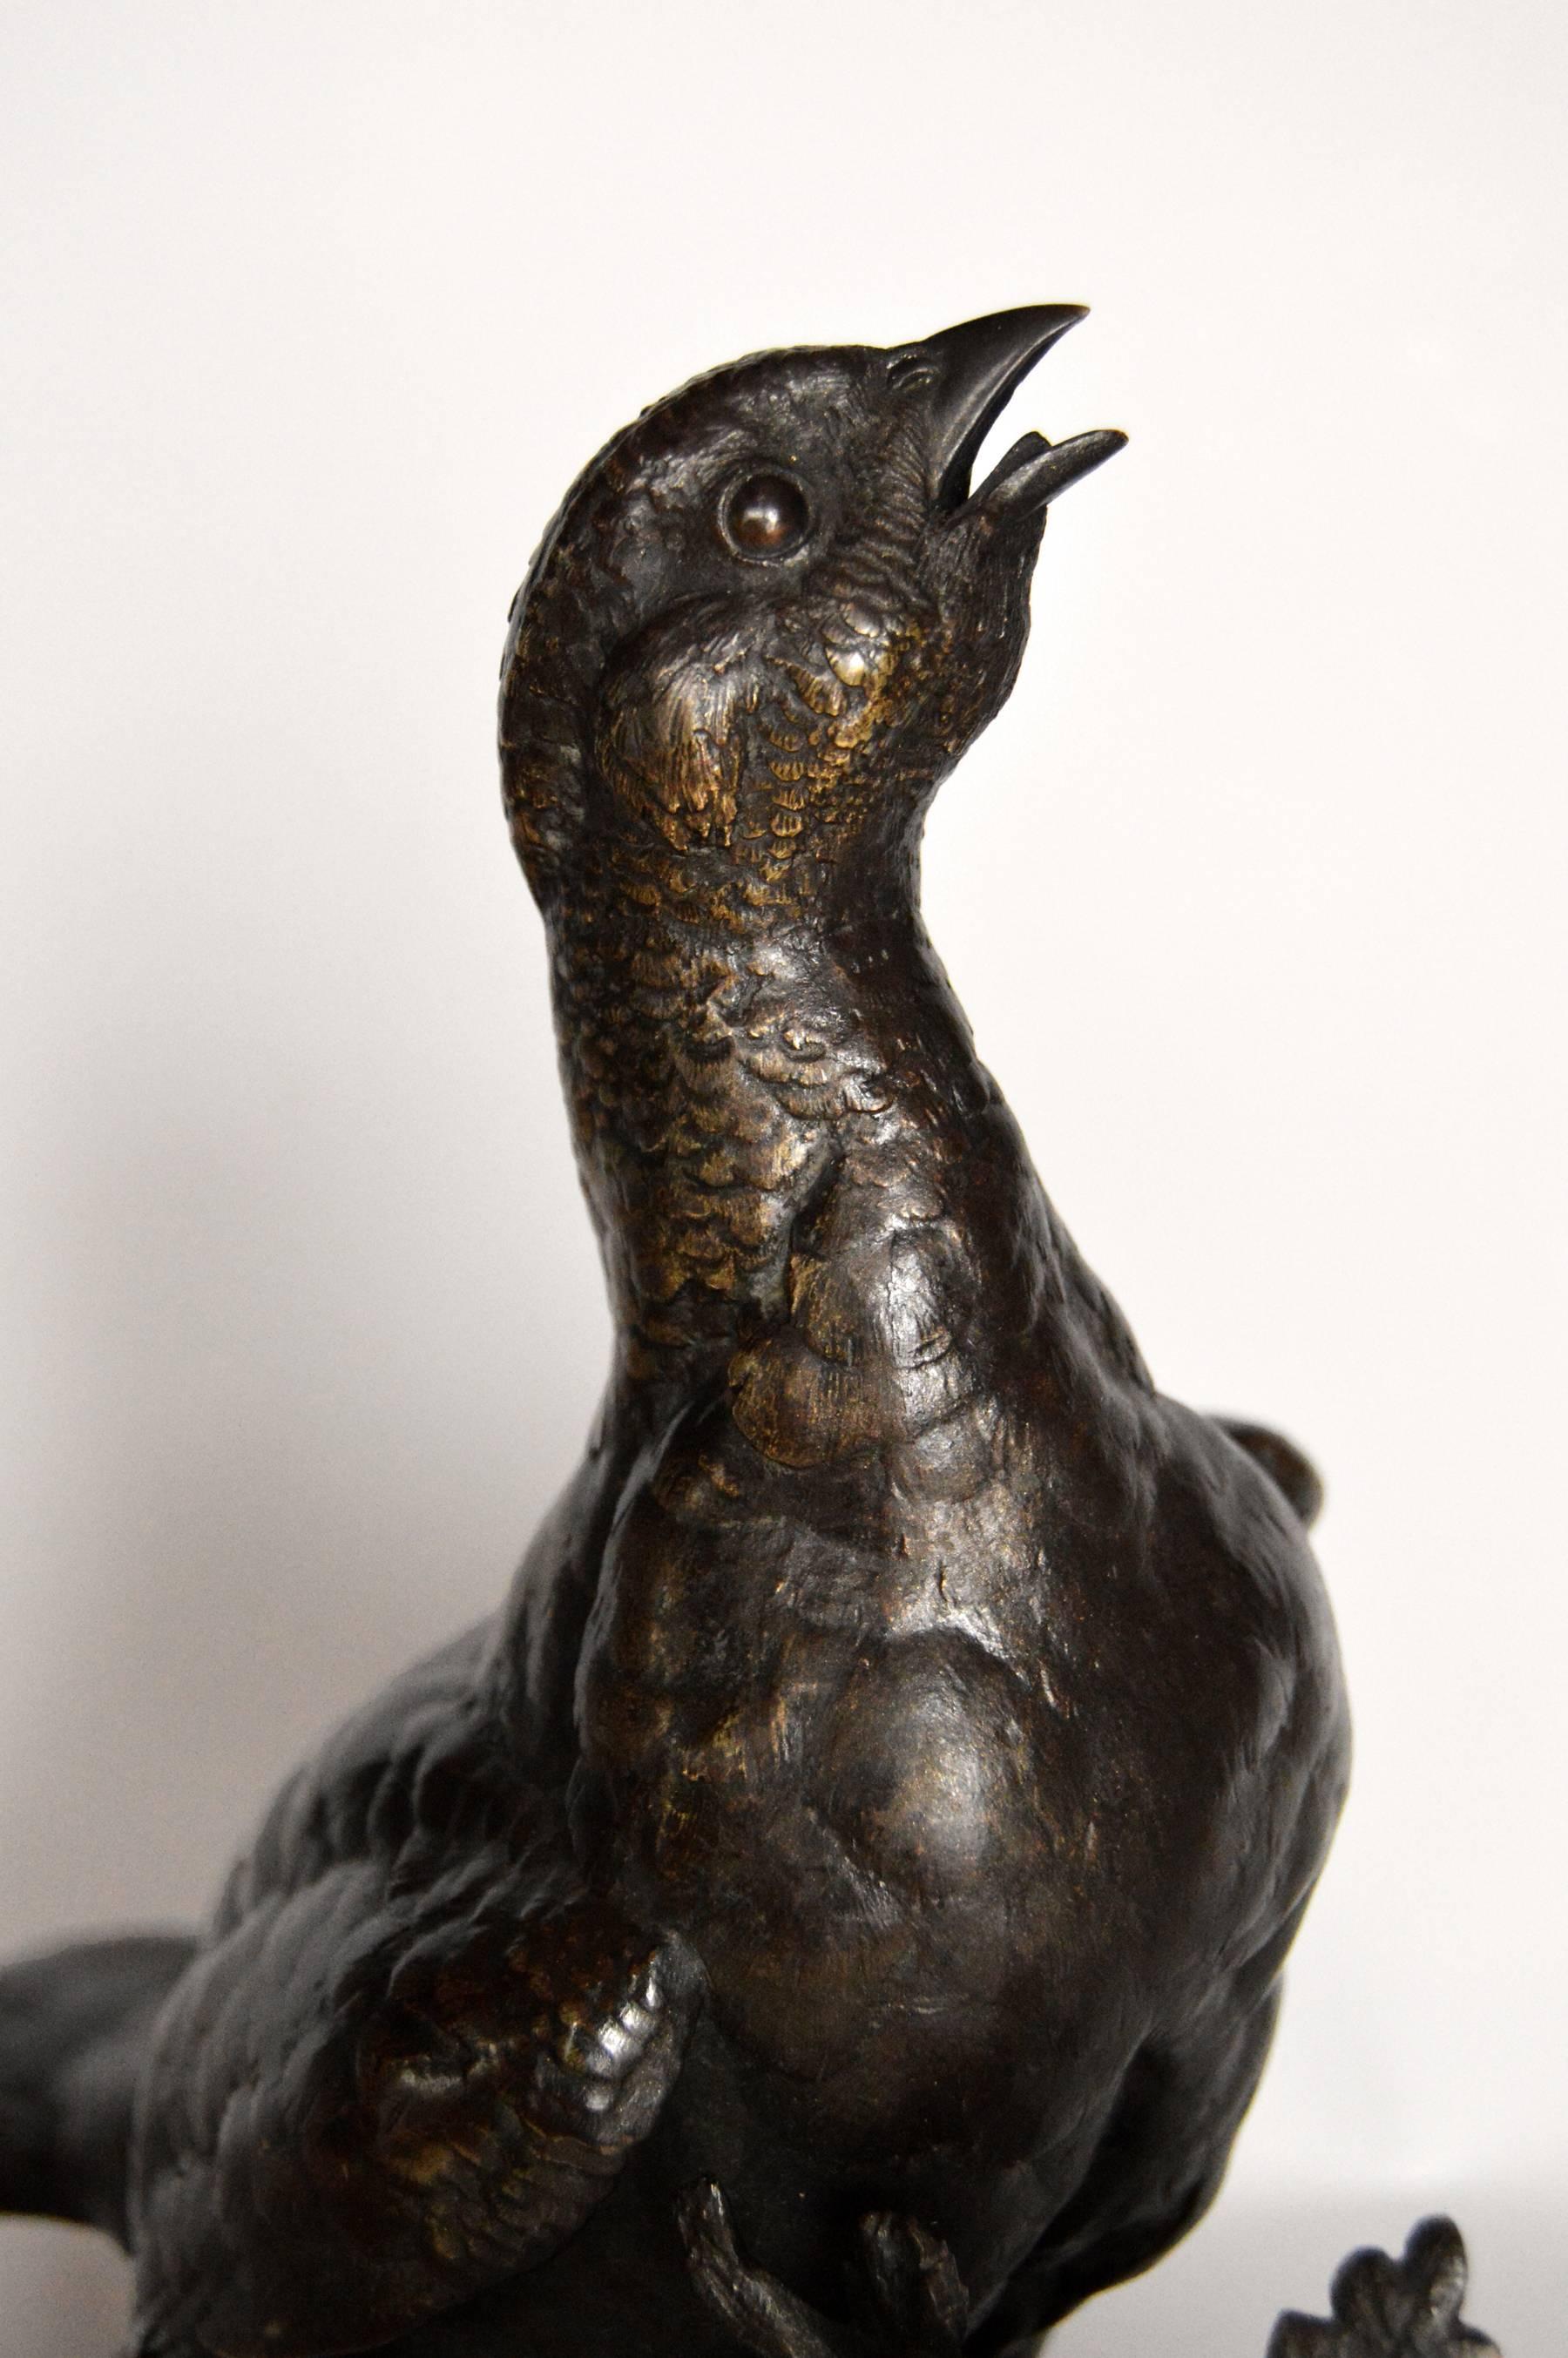 Jules Moigniez
French, (1835-1894)
Pheasant
Bronze, signed
Height: 10½ inches 
Width: 11 inches
Depth: 4½ inches
Jules Moigniez was a well-known animal sculptor who was born in Senlis in 1835, the son of a metal gilder. He studied under Paul